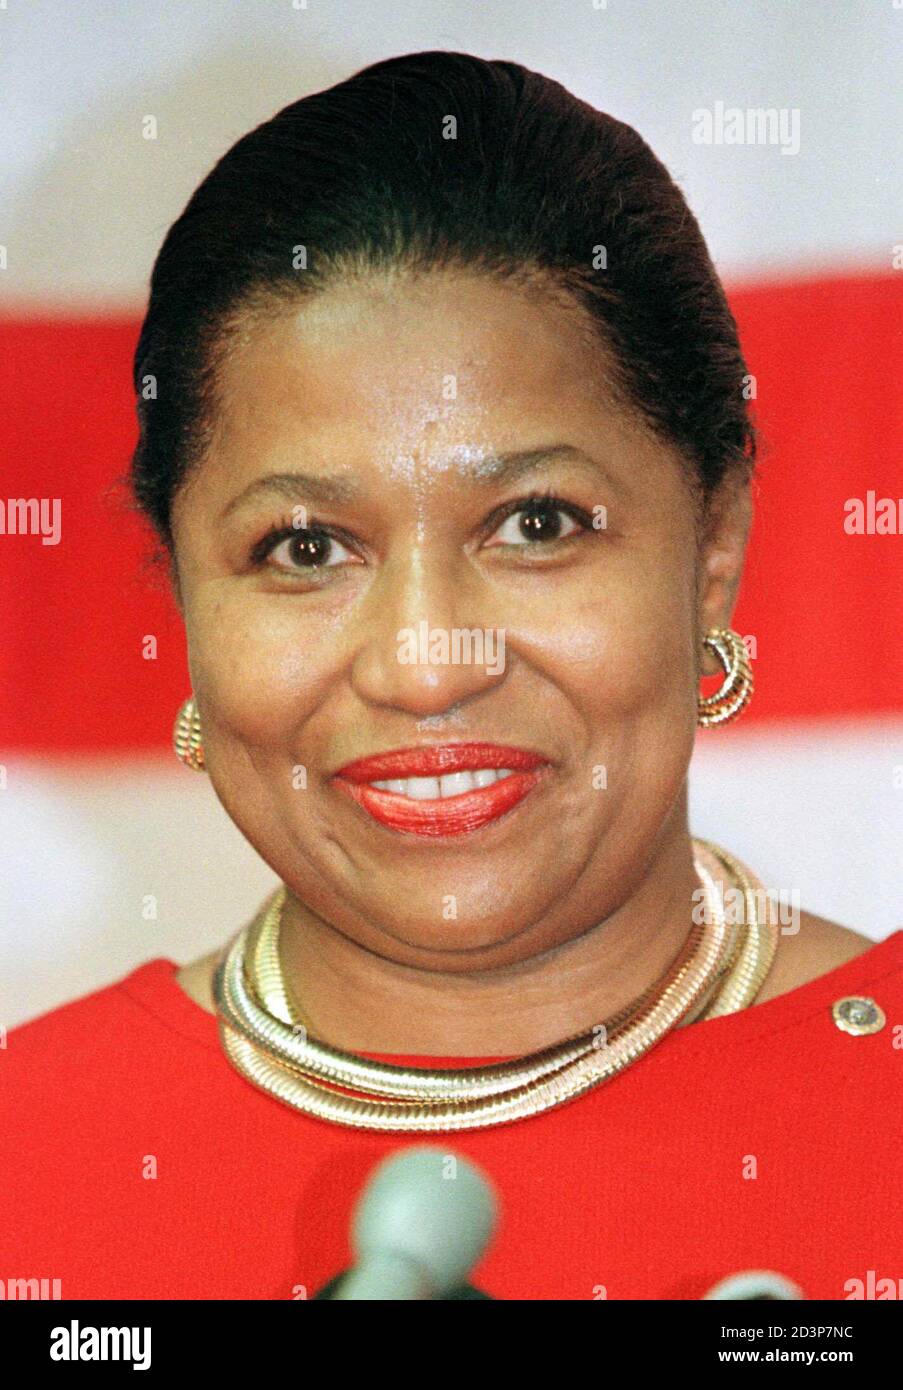 Former U.S. Senator Carol Moseley-Braun, the first black woman elected to the Senate, announced on February 18, 2003 that she would enter the crowded field of Democrats seeking the White House. Moseley-Braun, shown Nov. 4, 1998, said she would emphasize her opposition to war with Iraq and campaign on domestic issues, including the struggling U.S. economy. REUTERS/Sue Ogrocki/Files  RC/SV Stock Photo